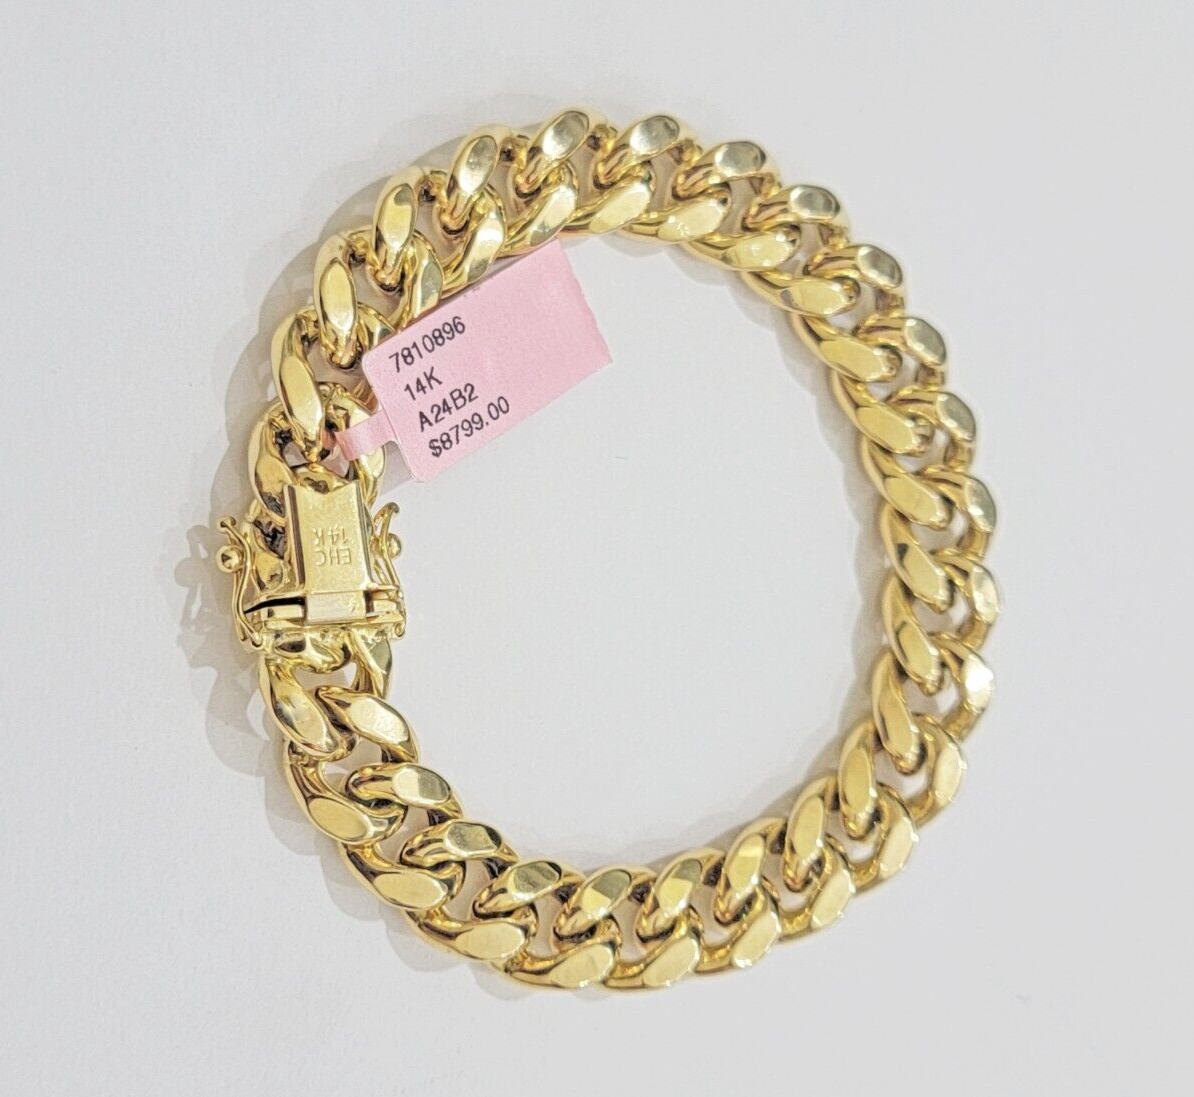 Mens 14k Yellow Gold Bracelet 7.5 Inch Miami Cuban Link Box Clasp REAL 14KT